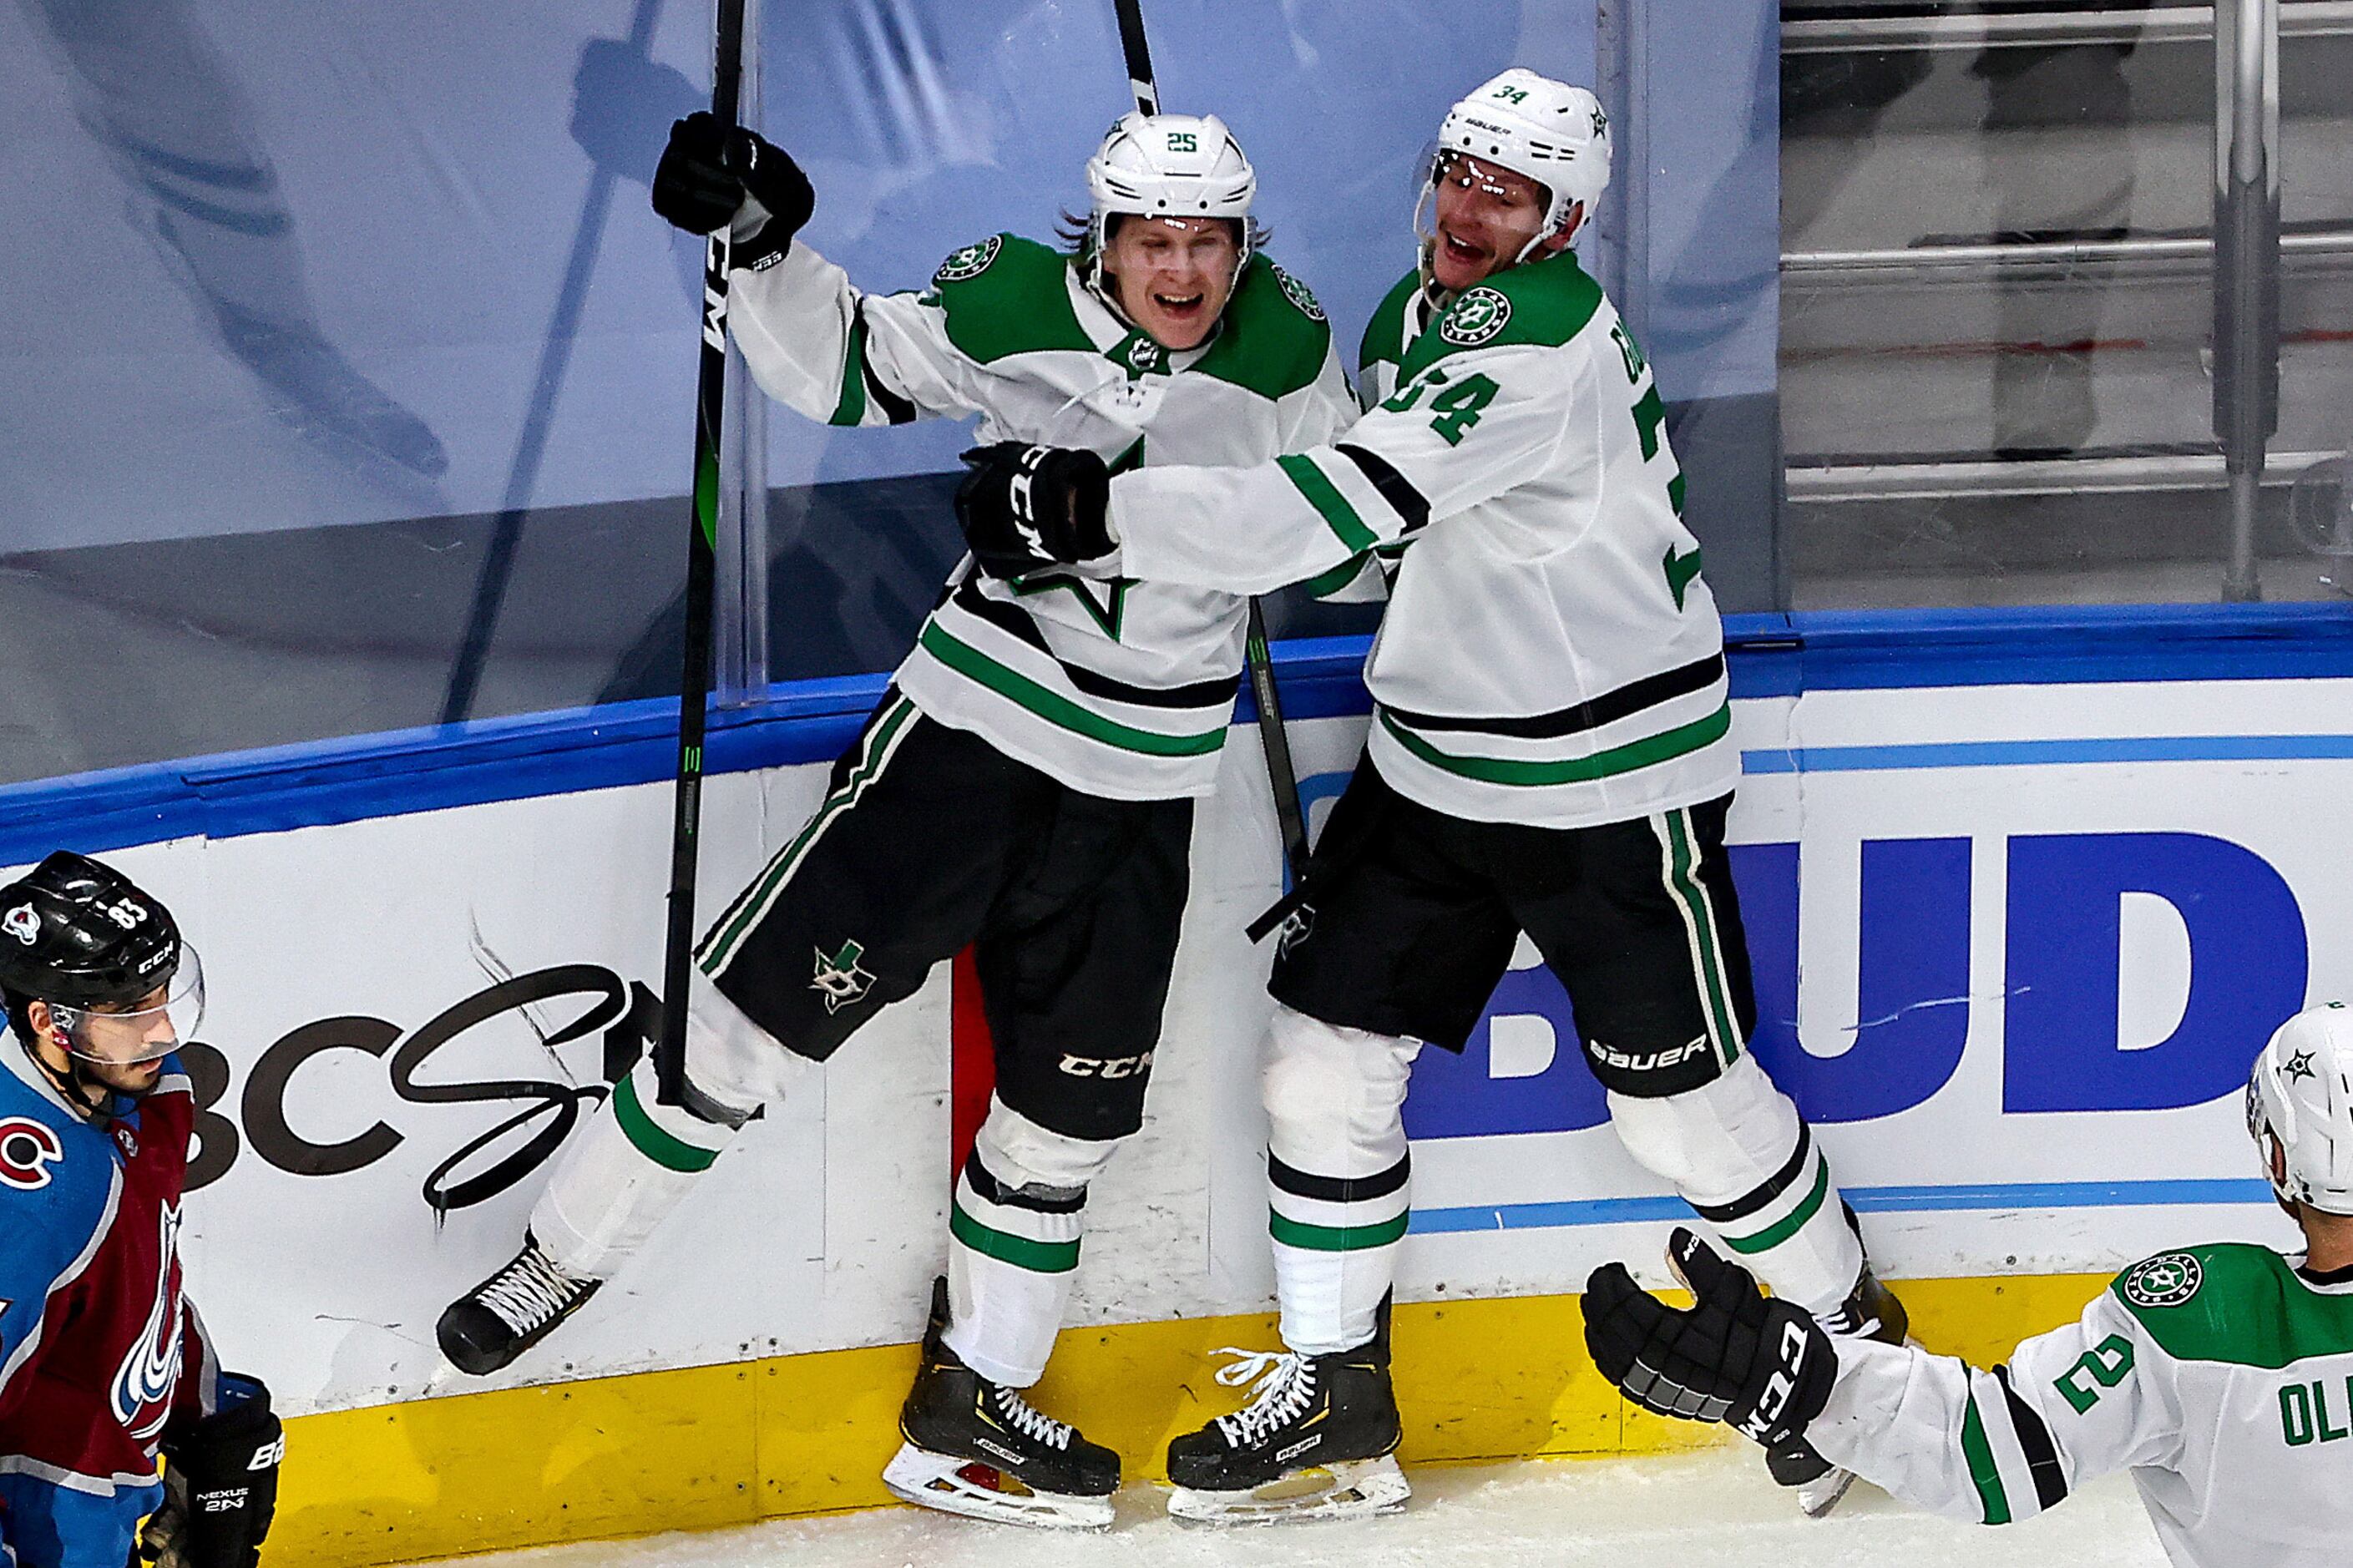 Sink or Swim: The Dallas Stars fight for their playoff lives in game 7